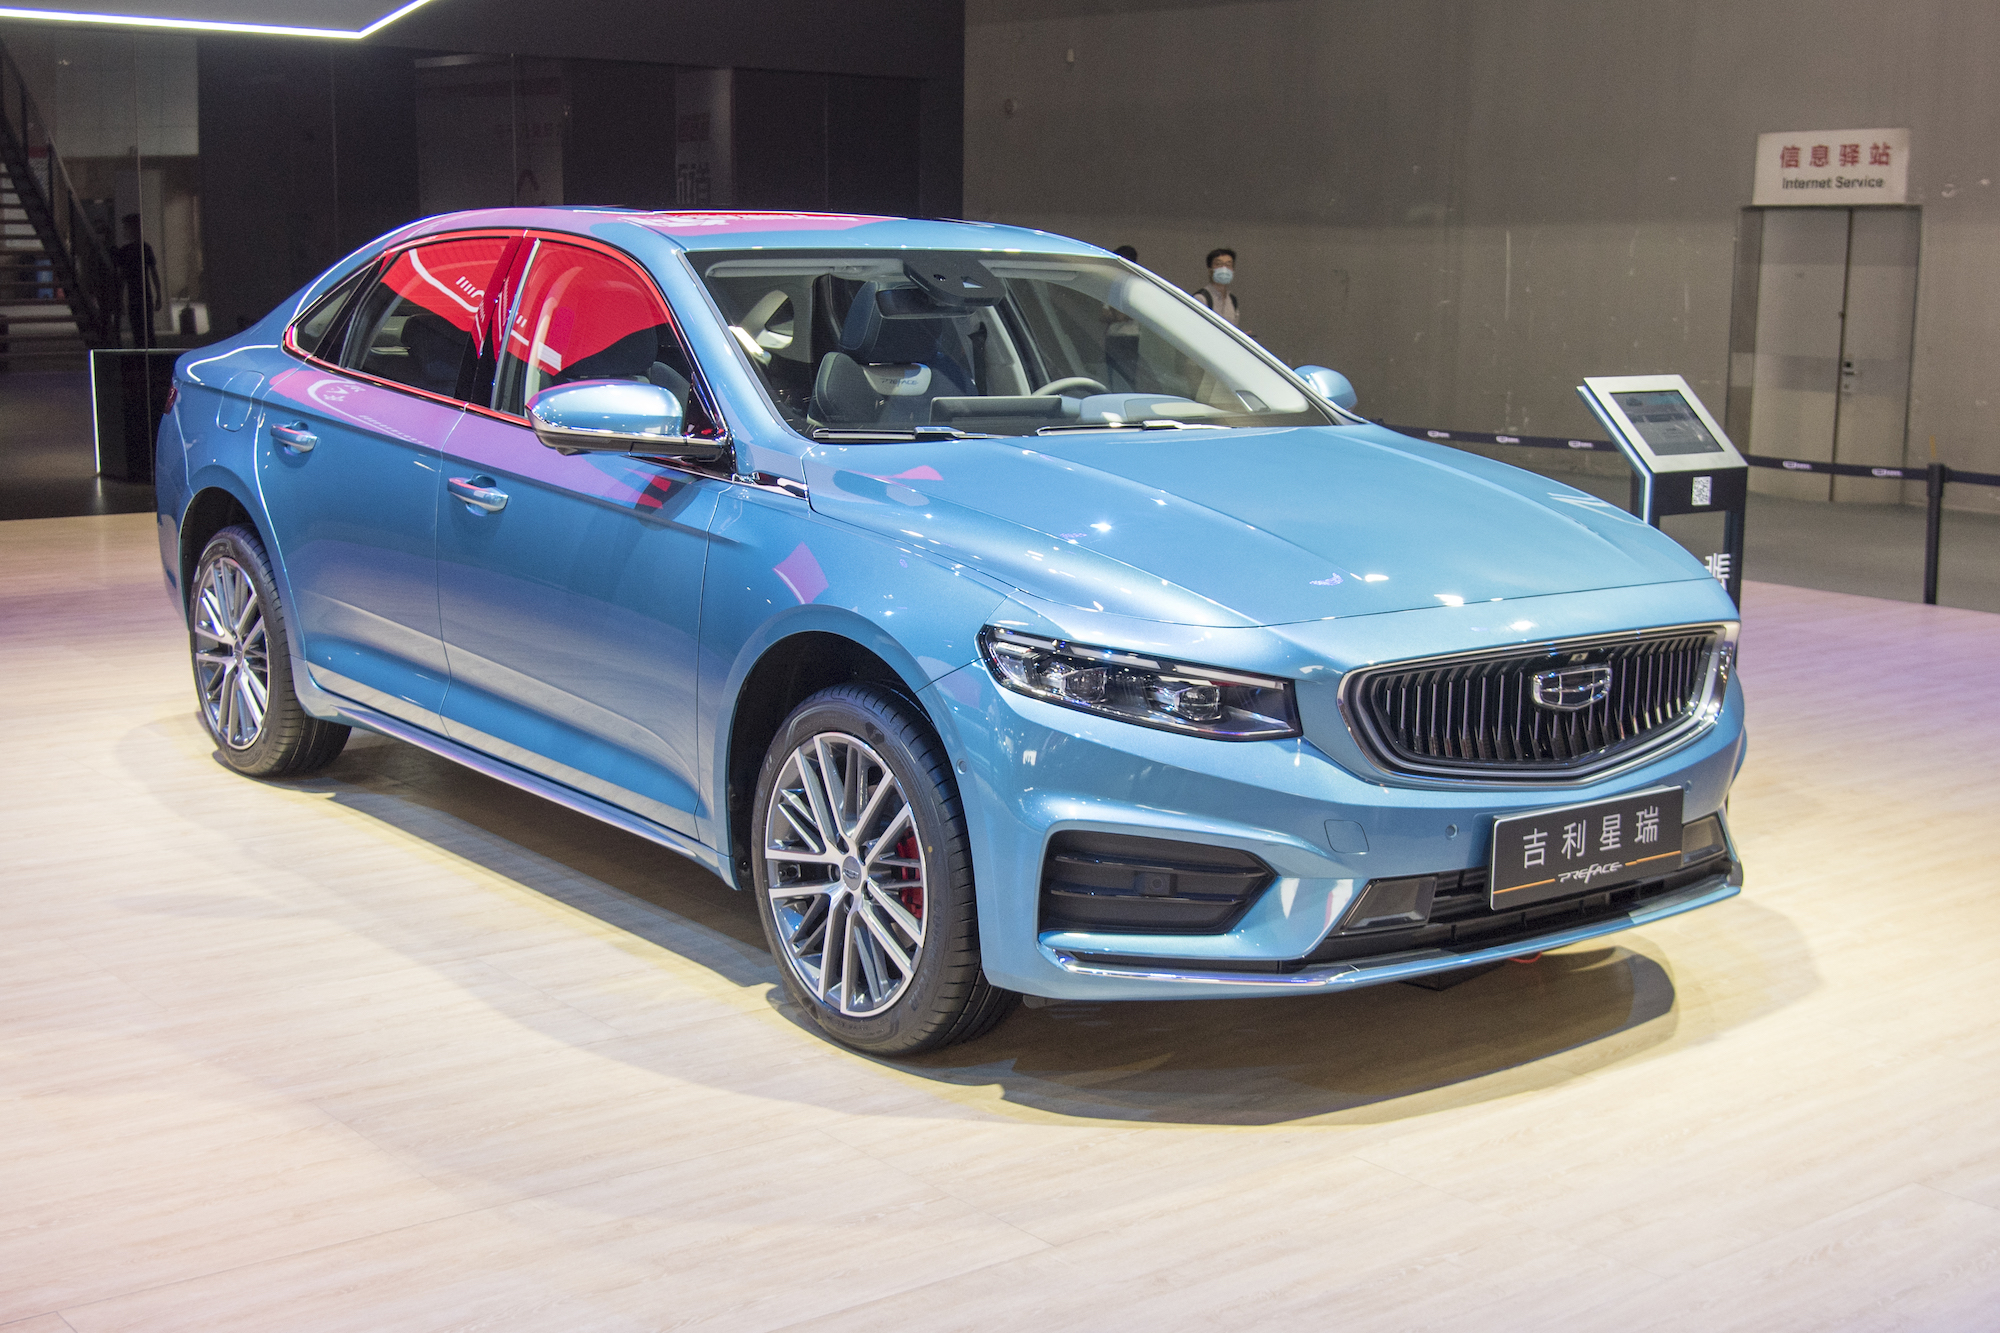 A sky-blue 2021 Geely Preface sedan is on display at the 18th Guangzhou International Automobile Exhibition at China Import and Export Fair Complex on November 20, 2020, in Guangzhou, Guangdong Province of China.